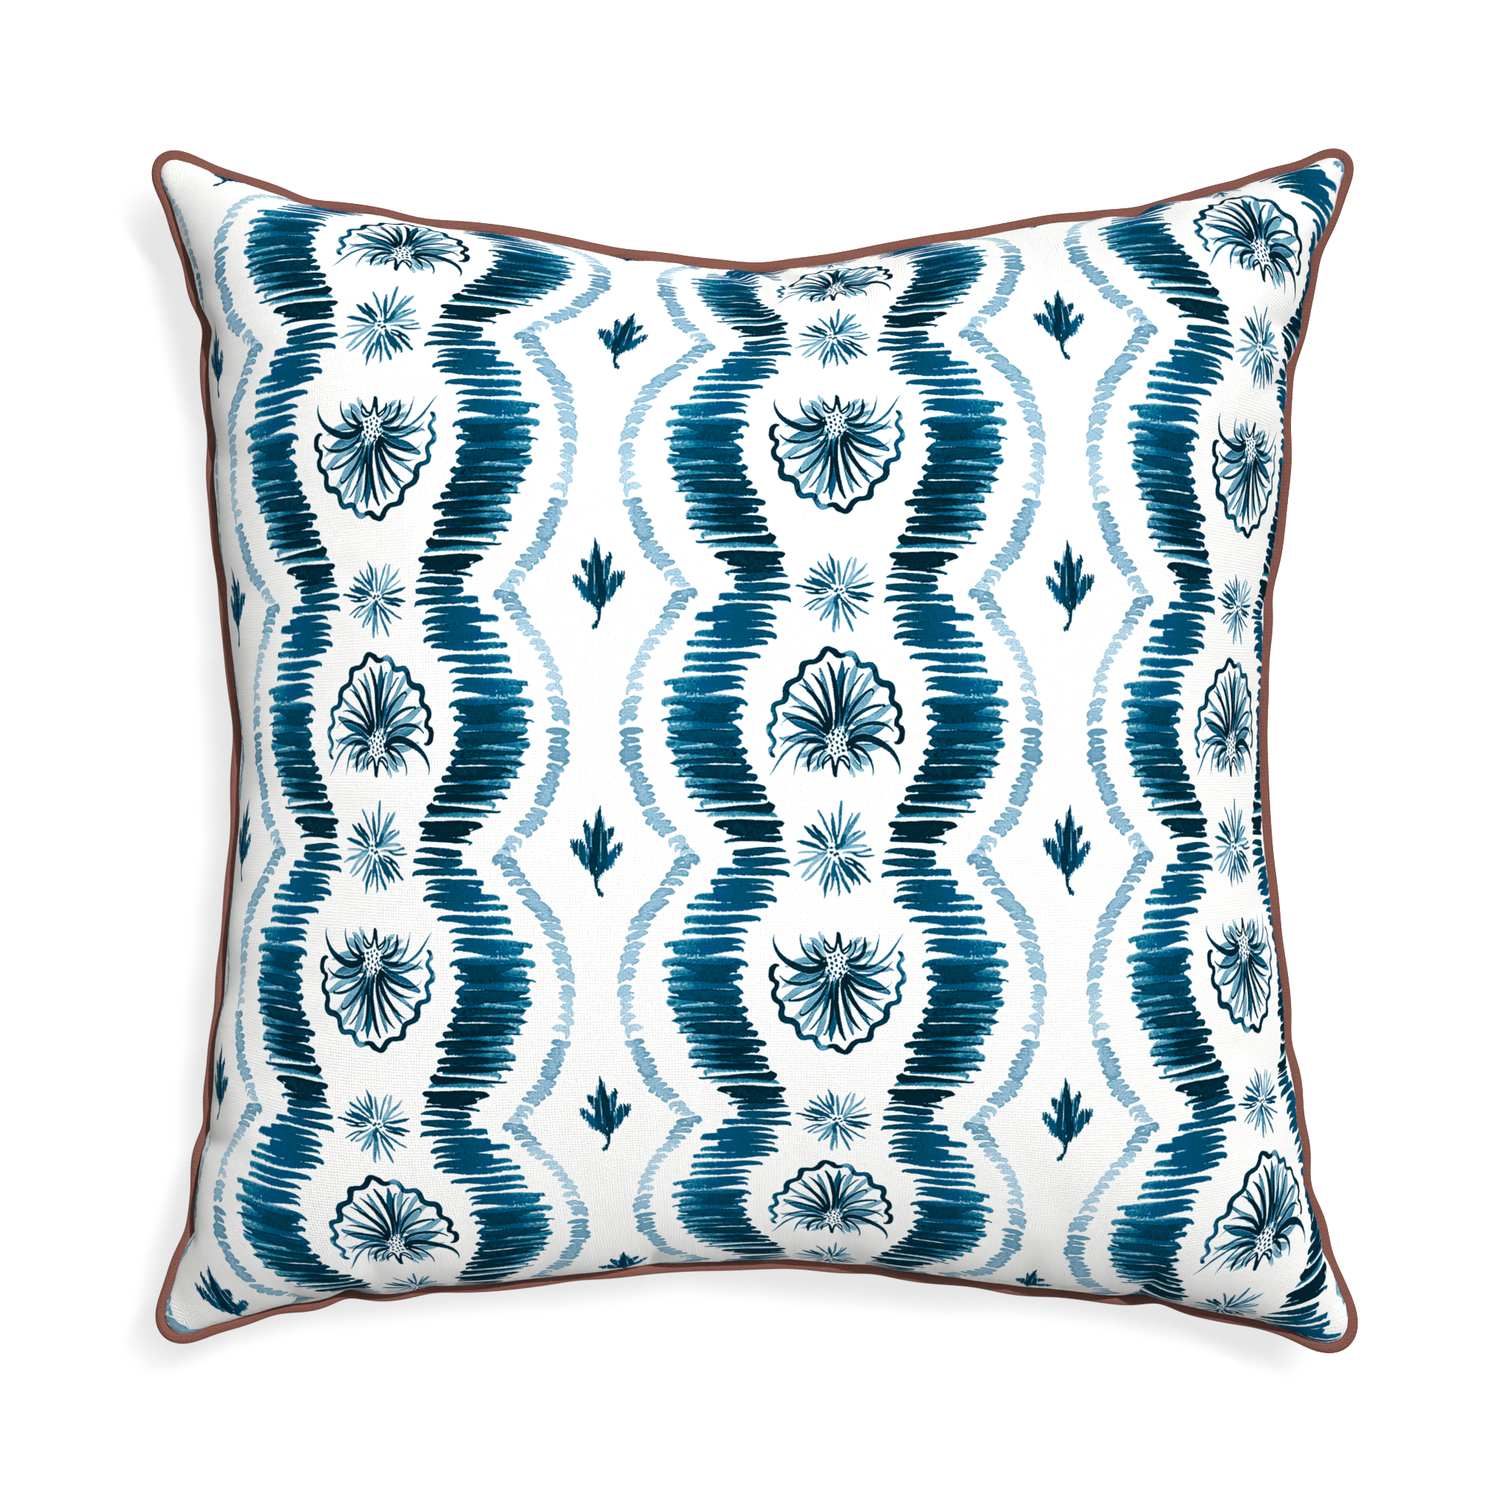 Euro-sham alice custom blue ikatpillow with w piping on white background